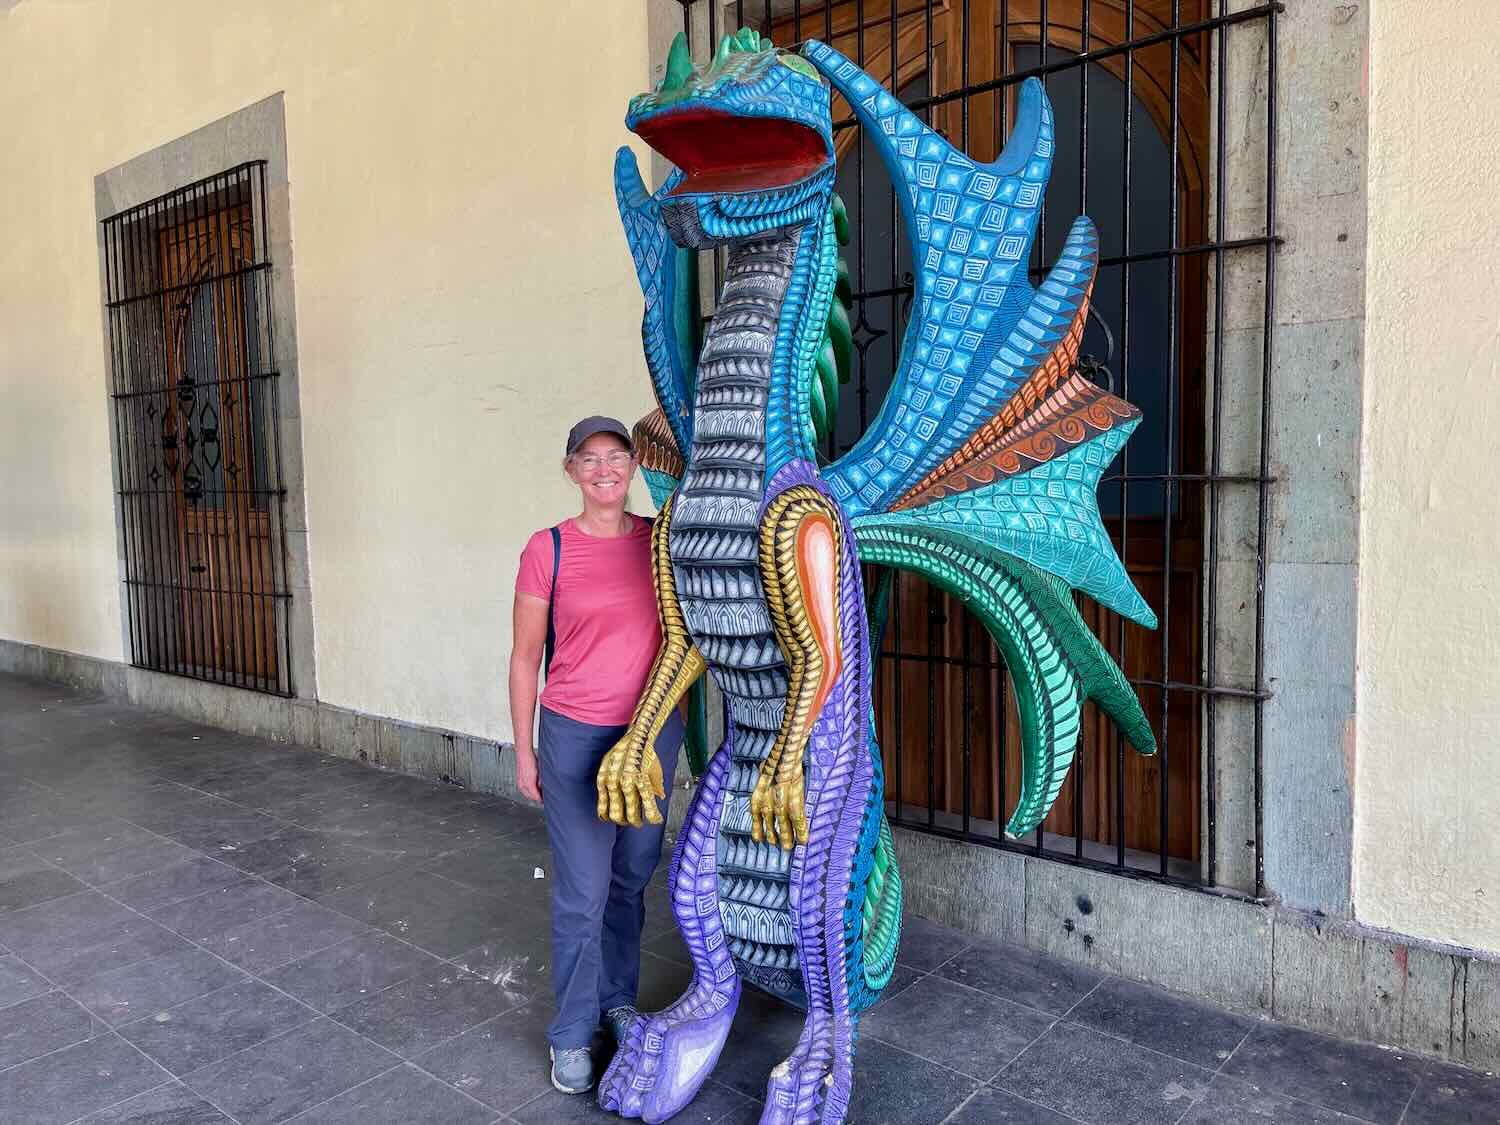 But some alebrijes are really big, like this one haunting a Oaxaca street corner